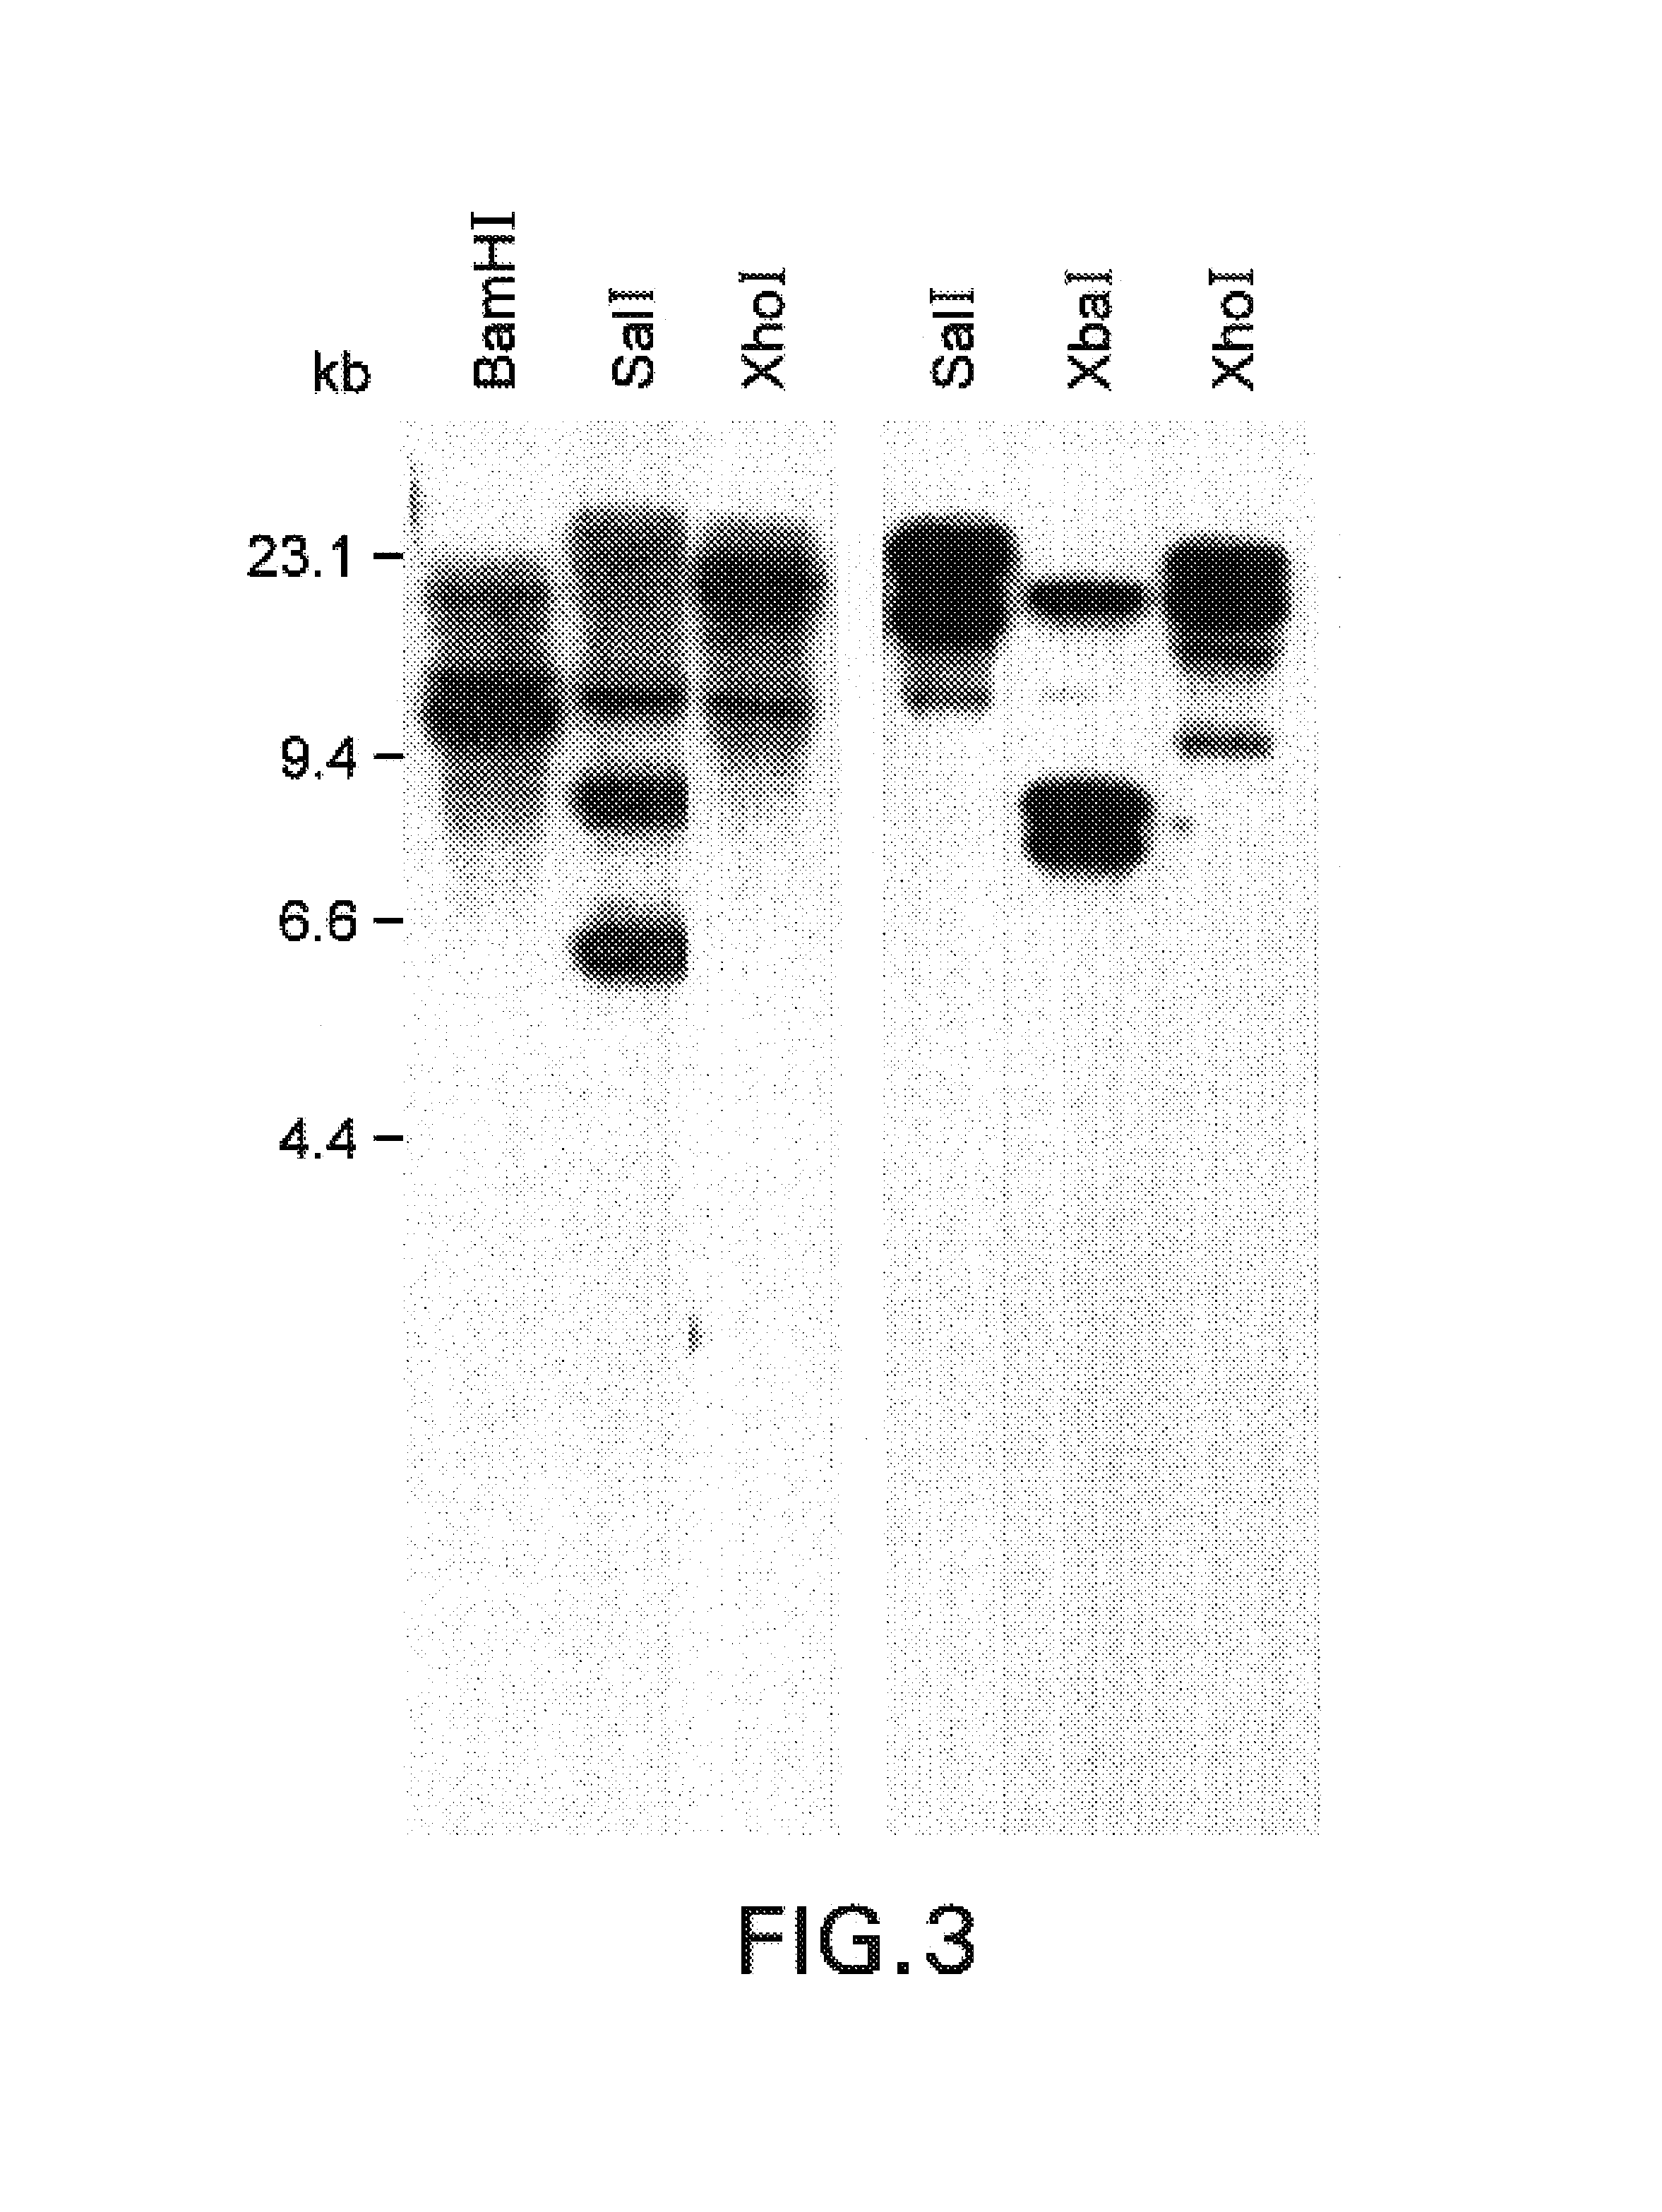 Plant brassinolide responsive genes and use thereof